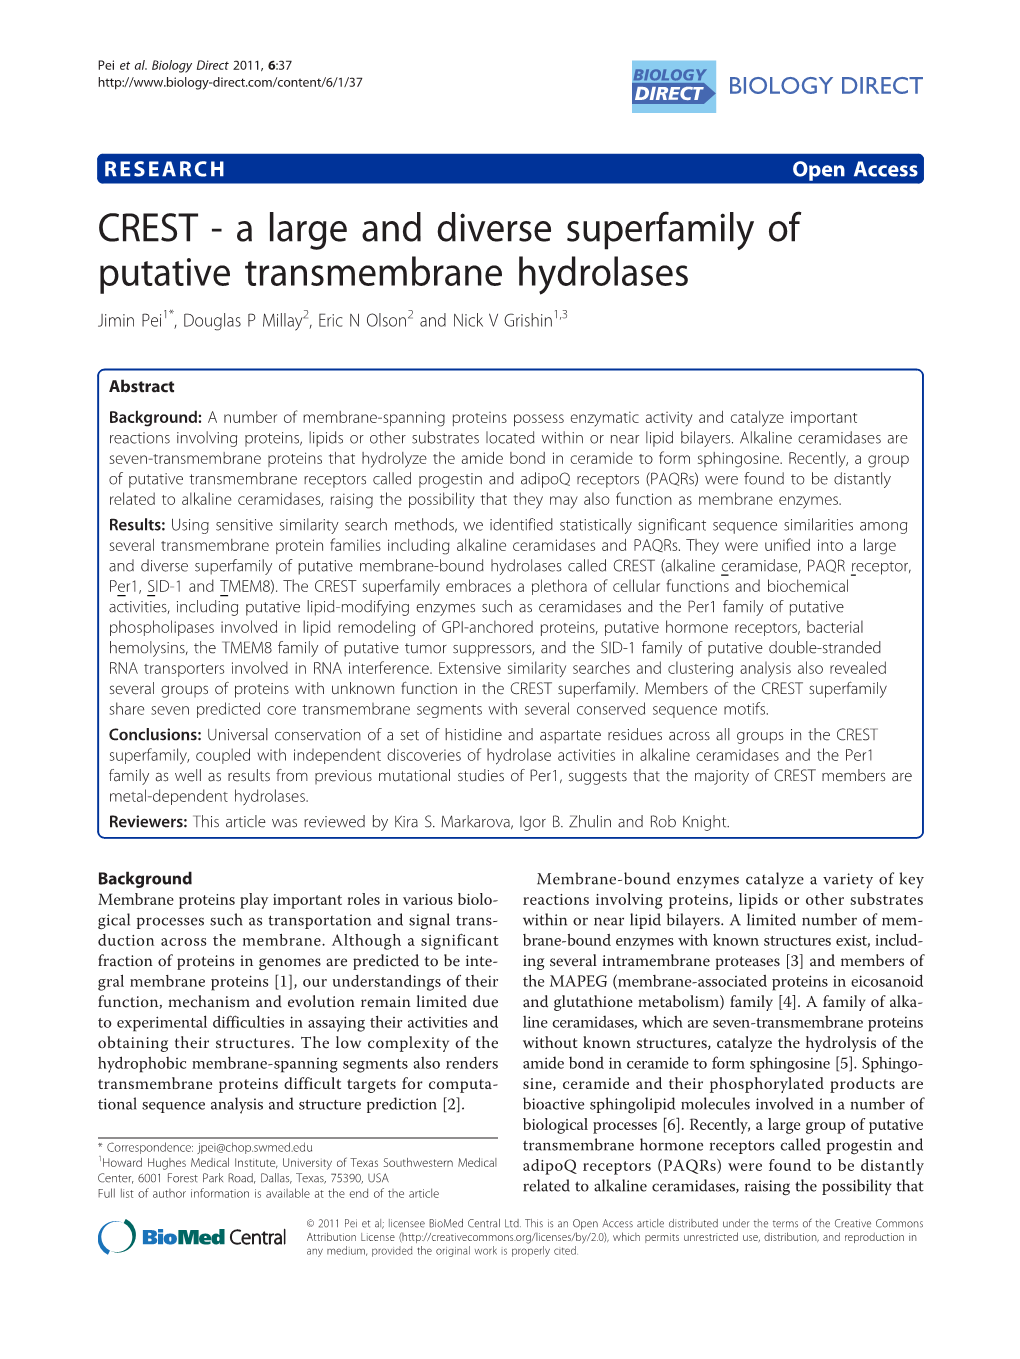 CREST - a Large and Diverse Superfamily of Putative Transmembrane Hydrolases Jimin Pei1*, Douglas P Millay2, Eric N Olson2 and Nick V Grishin1,3